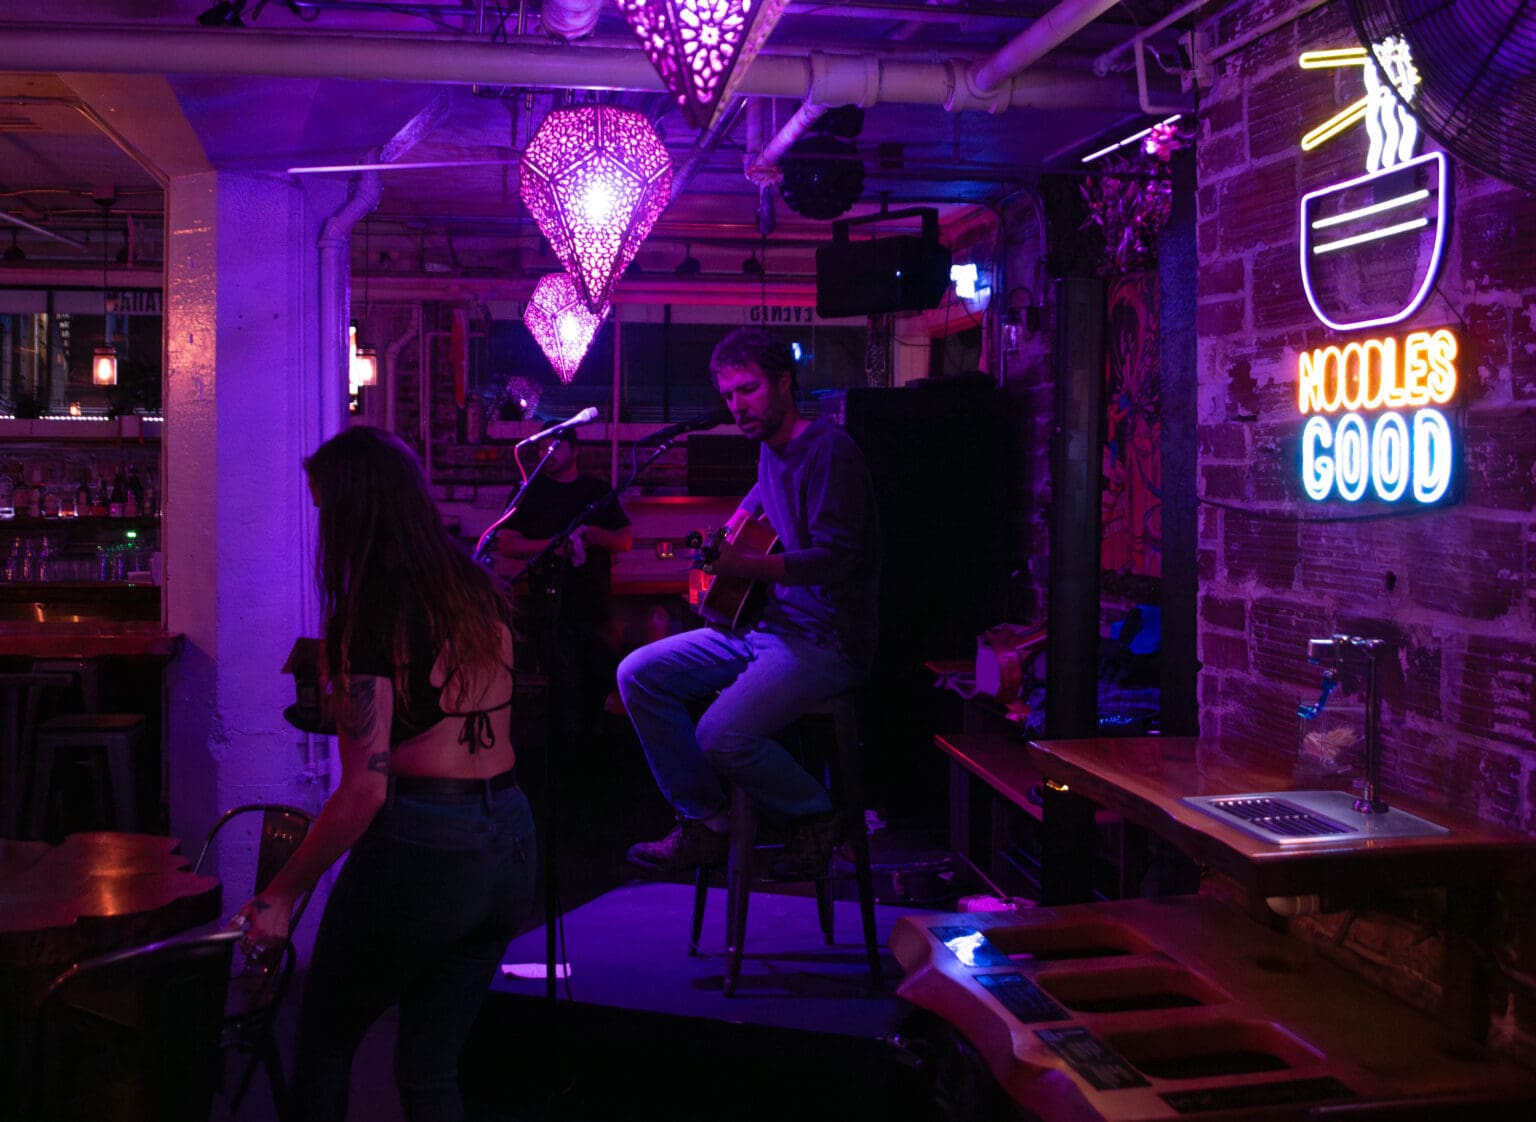 Pete Ruble performs at Culture Cafe where the interior is doused in purple lighting.